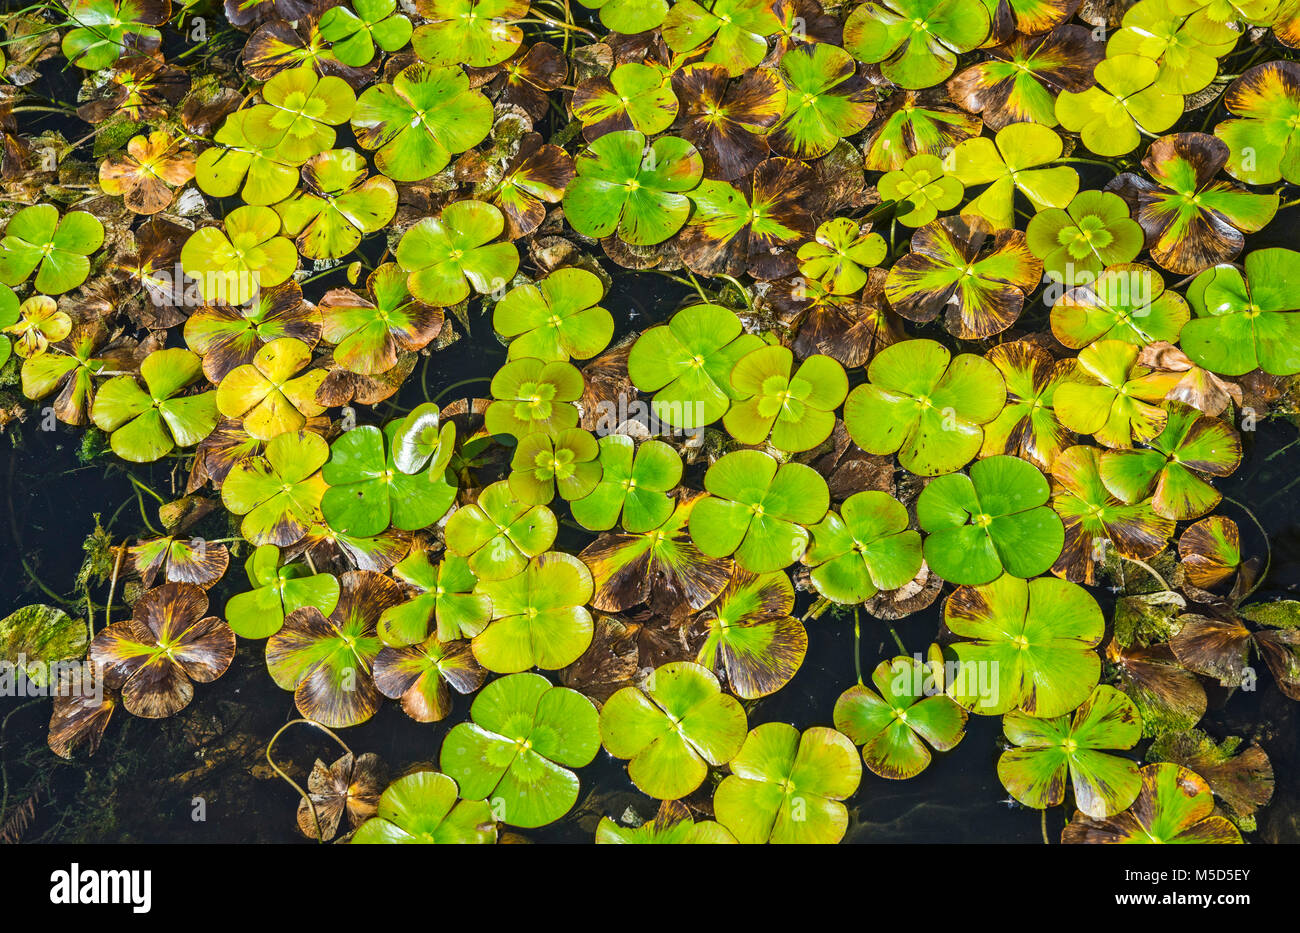 A floating water clover growing in an aquatic garden setting in North Central Florida. Stock Photo